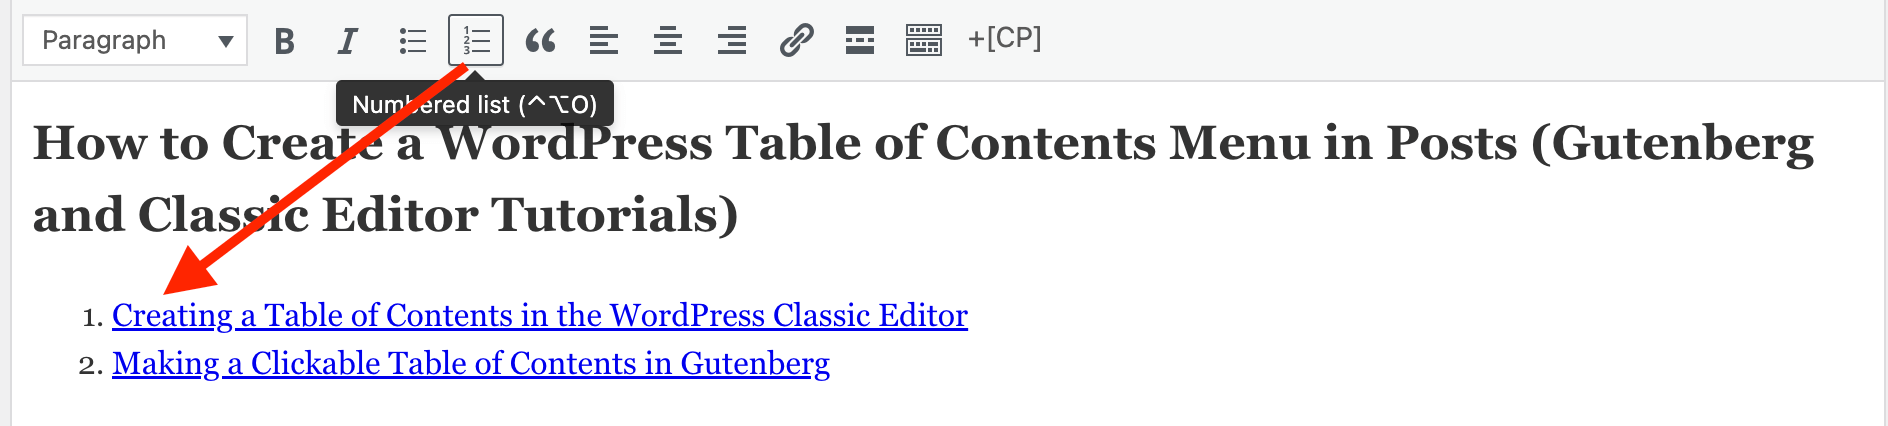 Ordered List Example (for Clickable Table of Contents) Screenshot